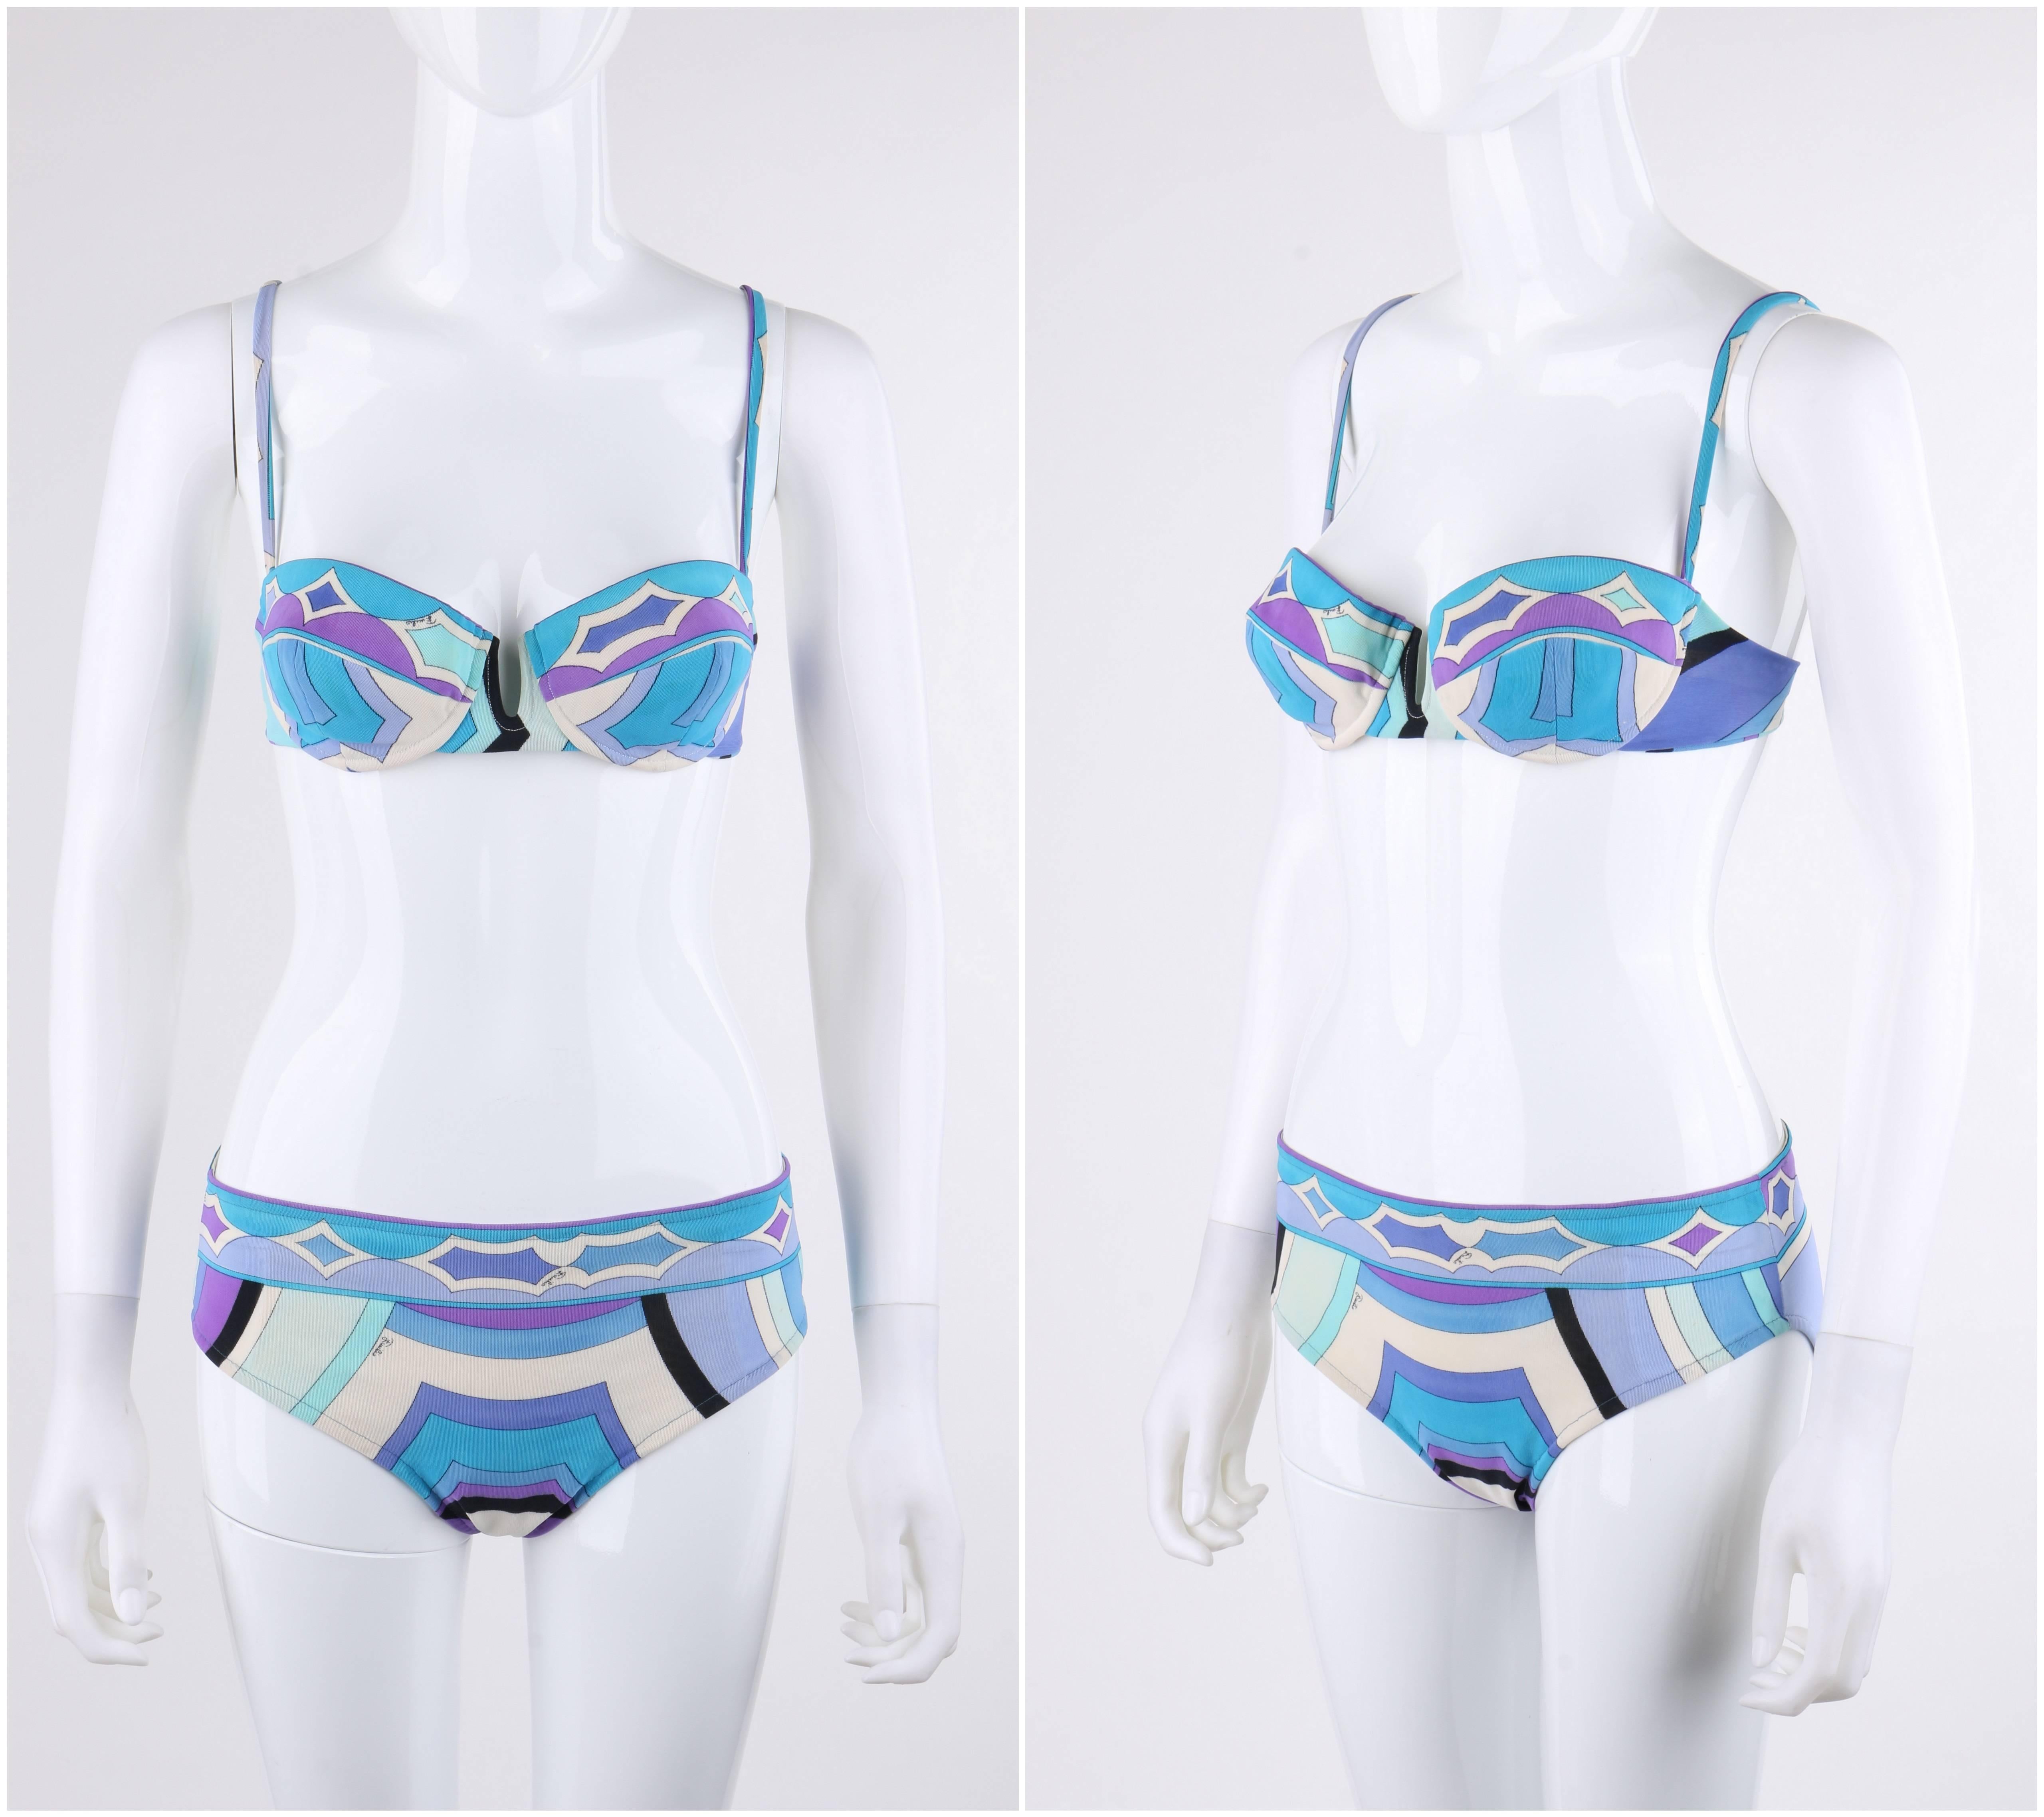 Vintage Emilio Pucci Swimsuit c.1960's two piece bikini bathing swim suit. Multicolor signature print mesh lycra in shades of blue, white, and black with diamond boarder print at top of bra cups and bottoms. Thin spaghetti strap top. Underwire cups.